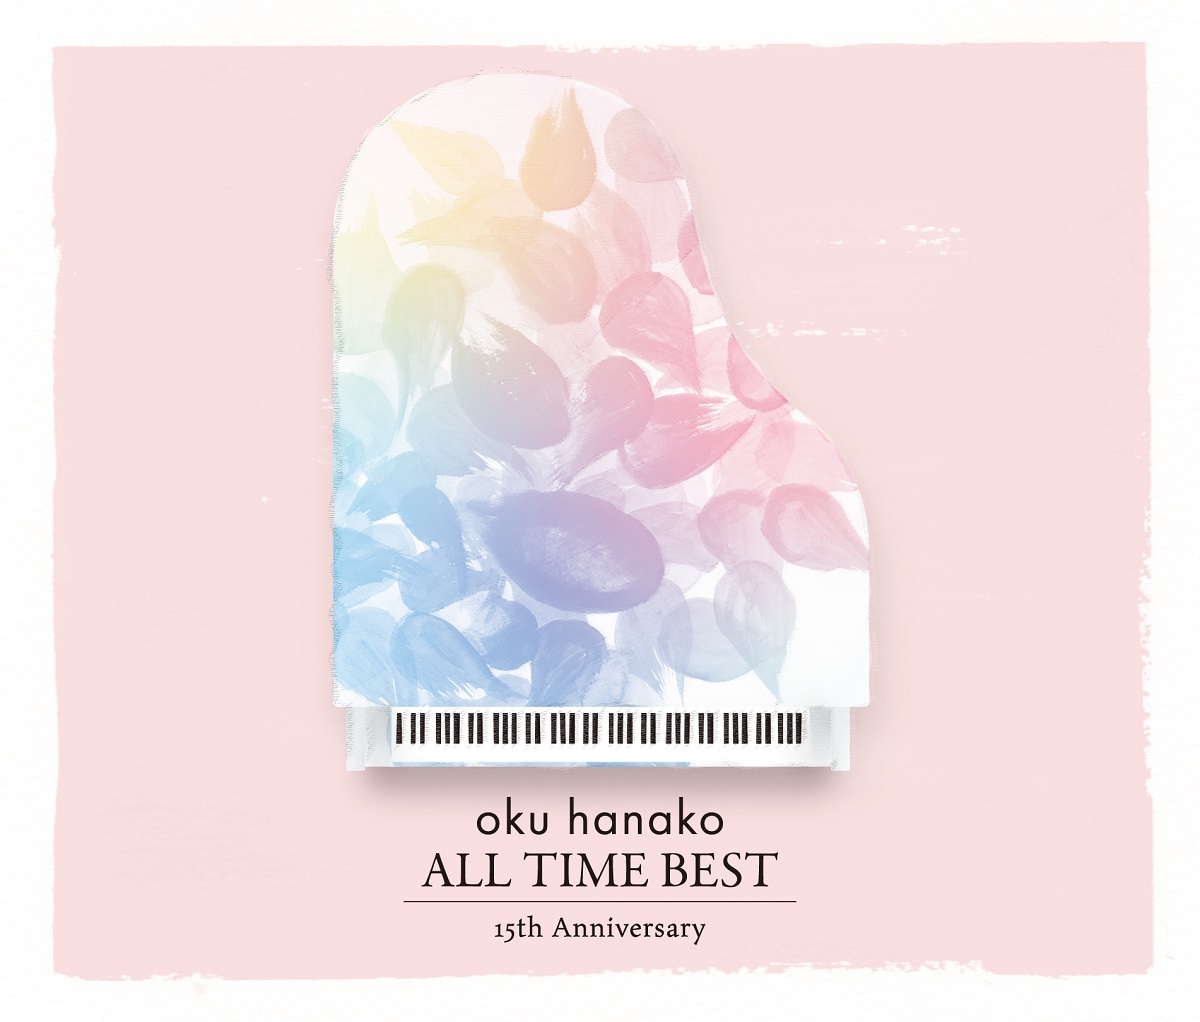 Cover art for『Hanako Oku - はなびら』from the release『Hanako Oku ALL TIME BEST